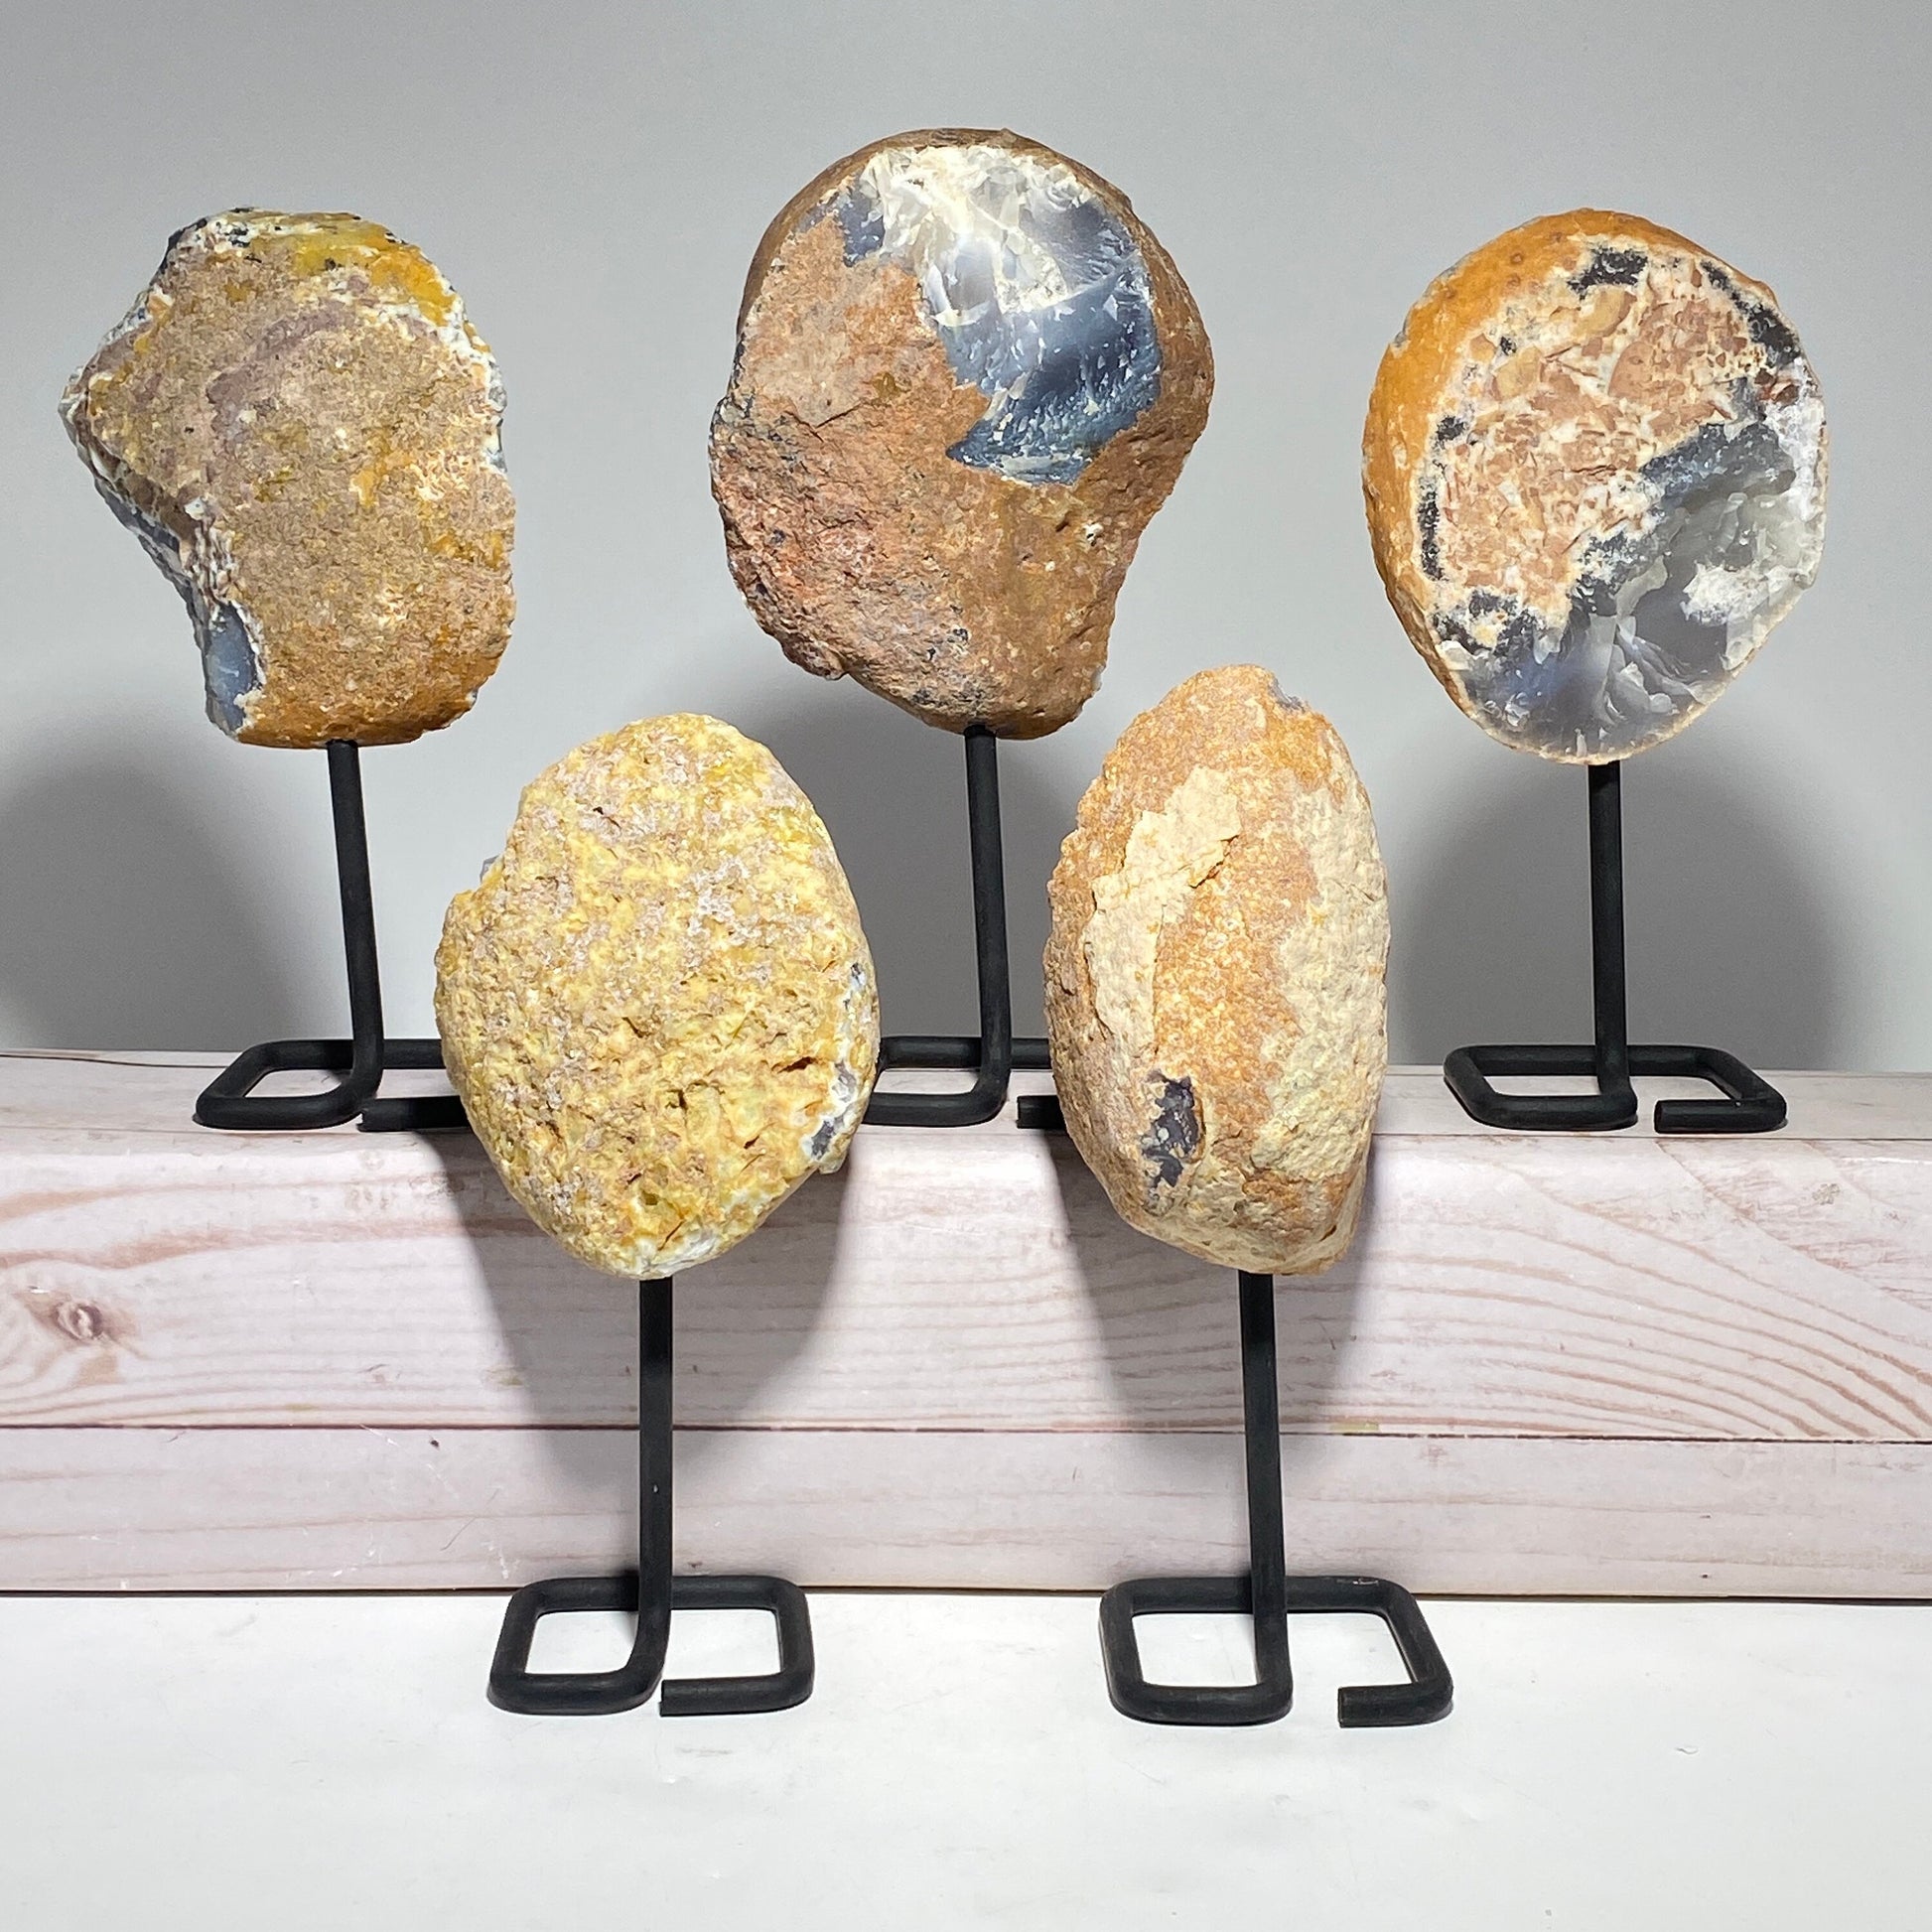 Natural Agate Geode on a metal stand